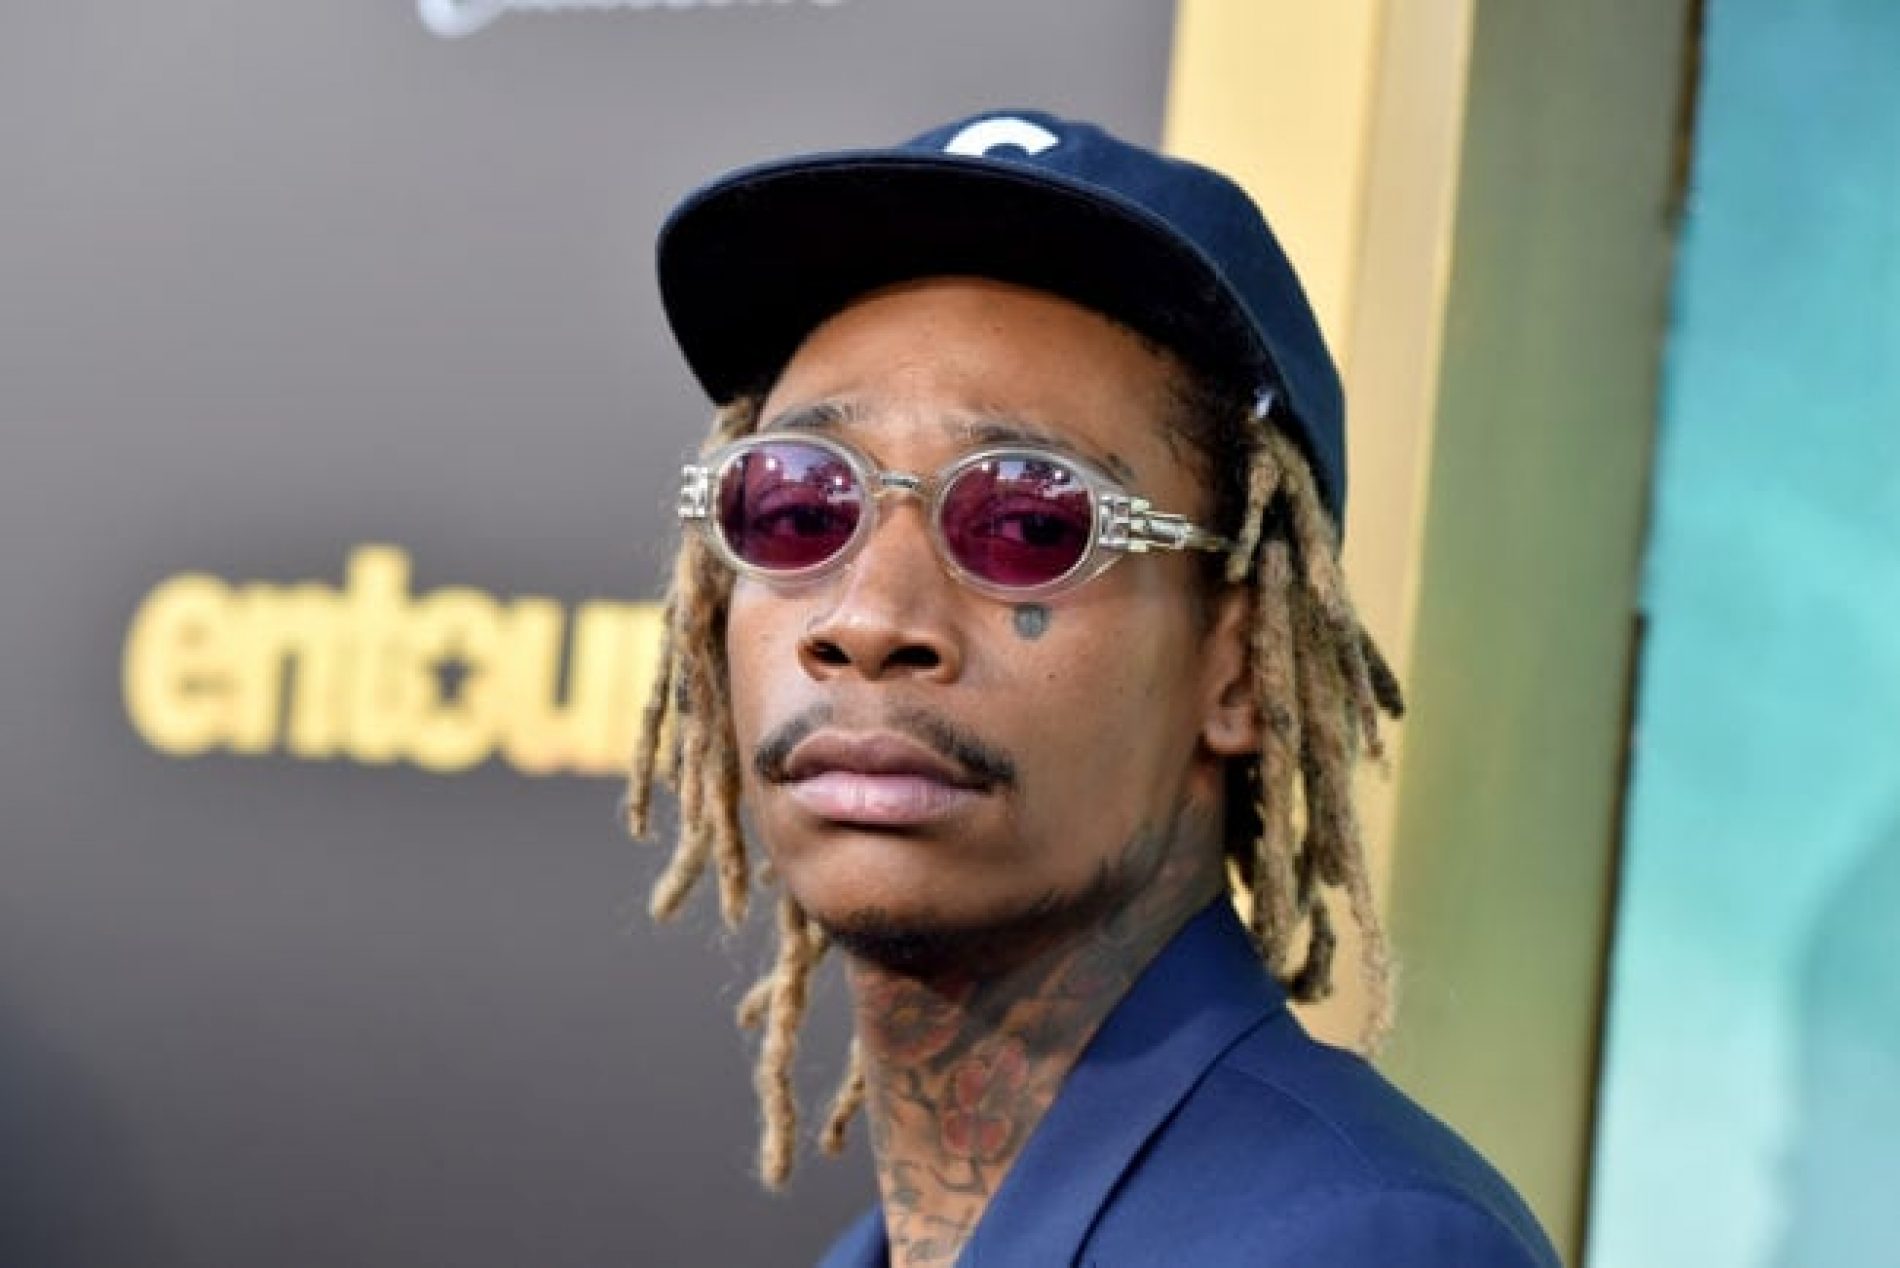 “You miss out on so many good things in life when you are homophobic.” Wiz Khalifa accused of homophobia for saying straight men shouldn’t bite bananas in public